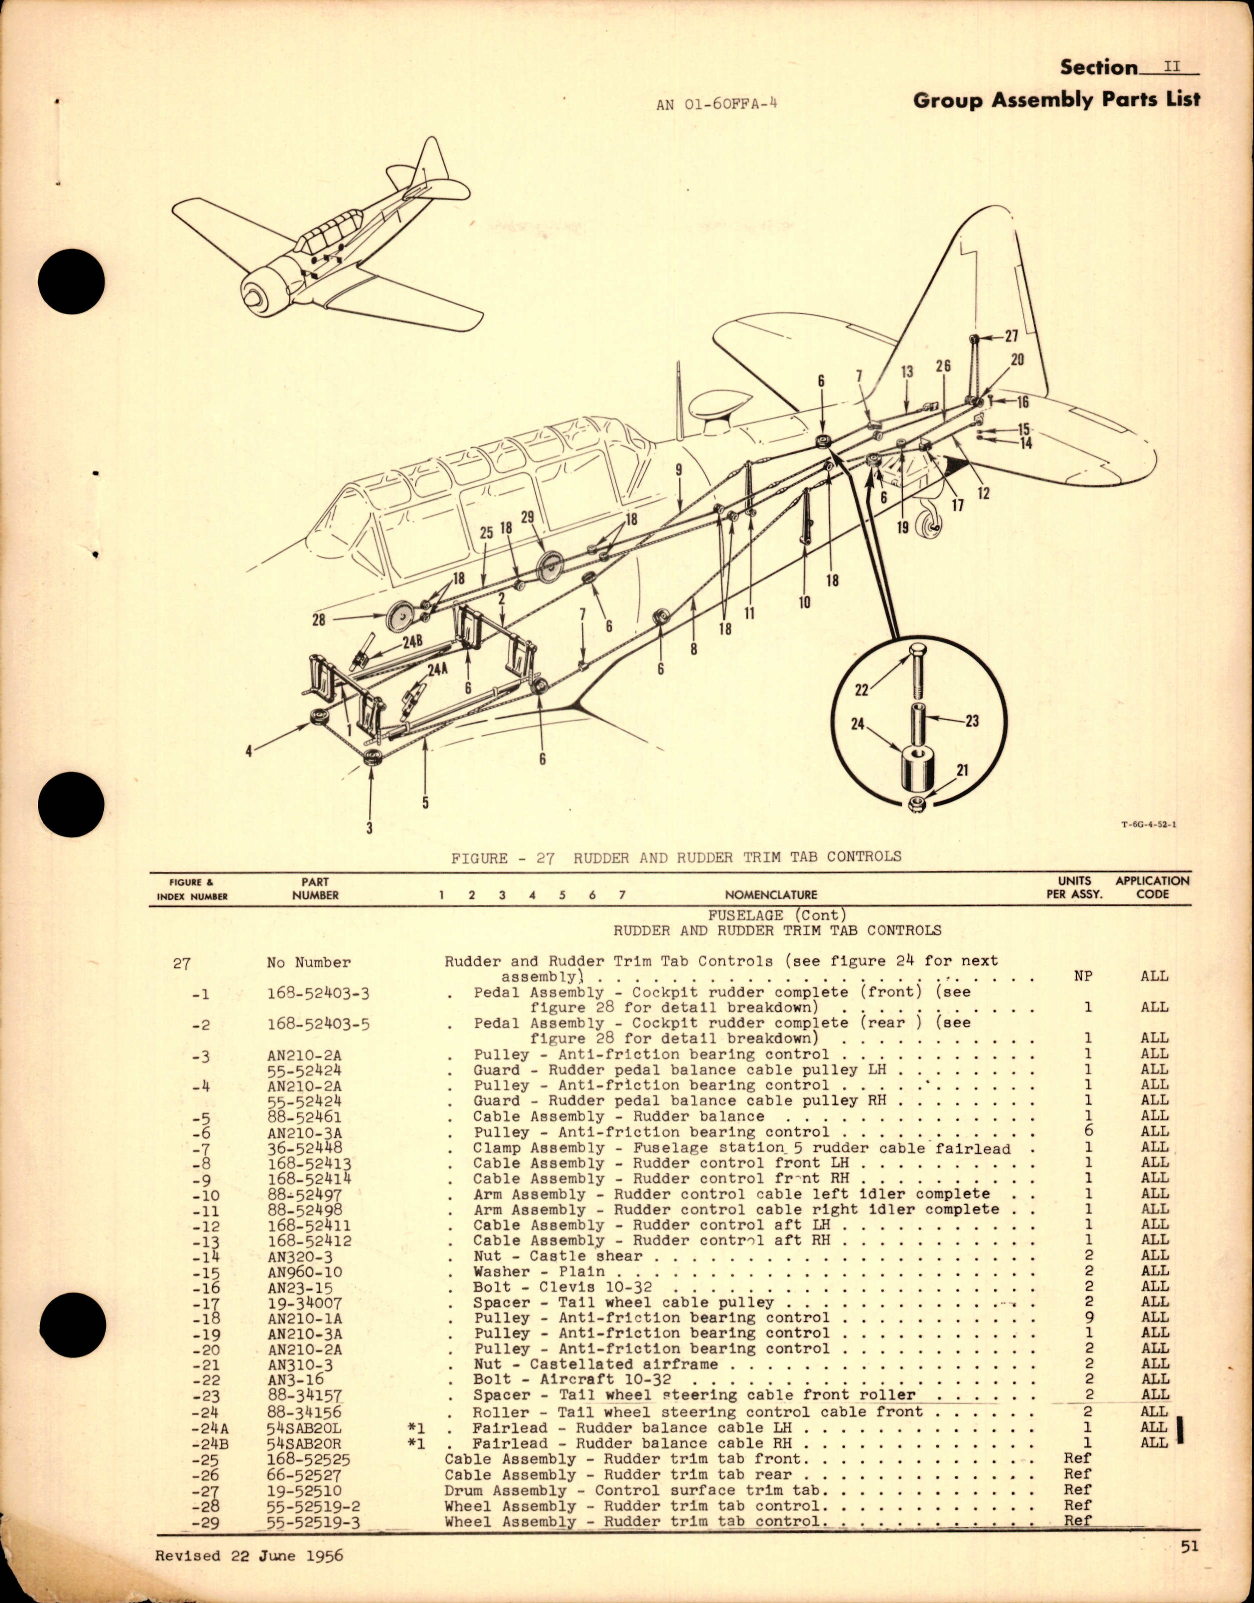 Sample page 5 from AirCorps Library document: Parts Catalog for T-6G and LT-6G